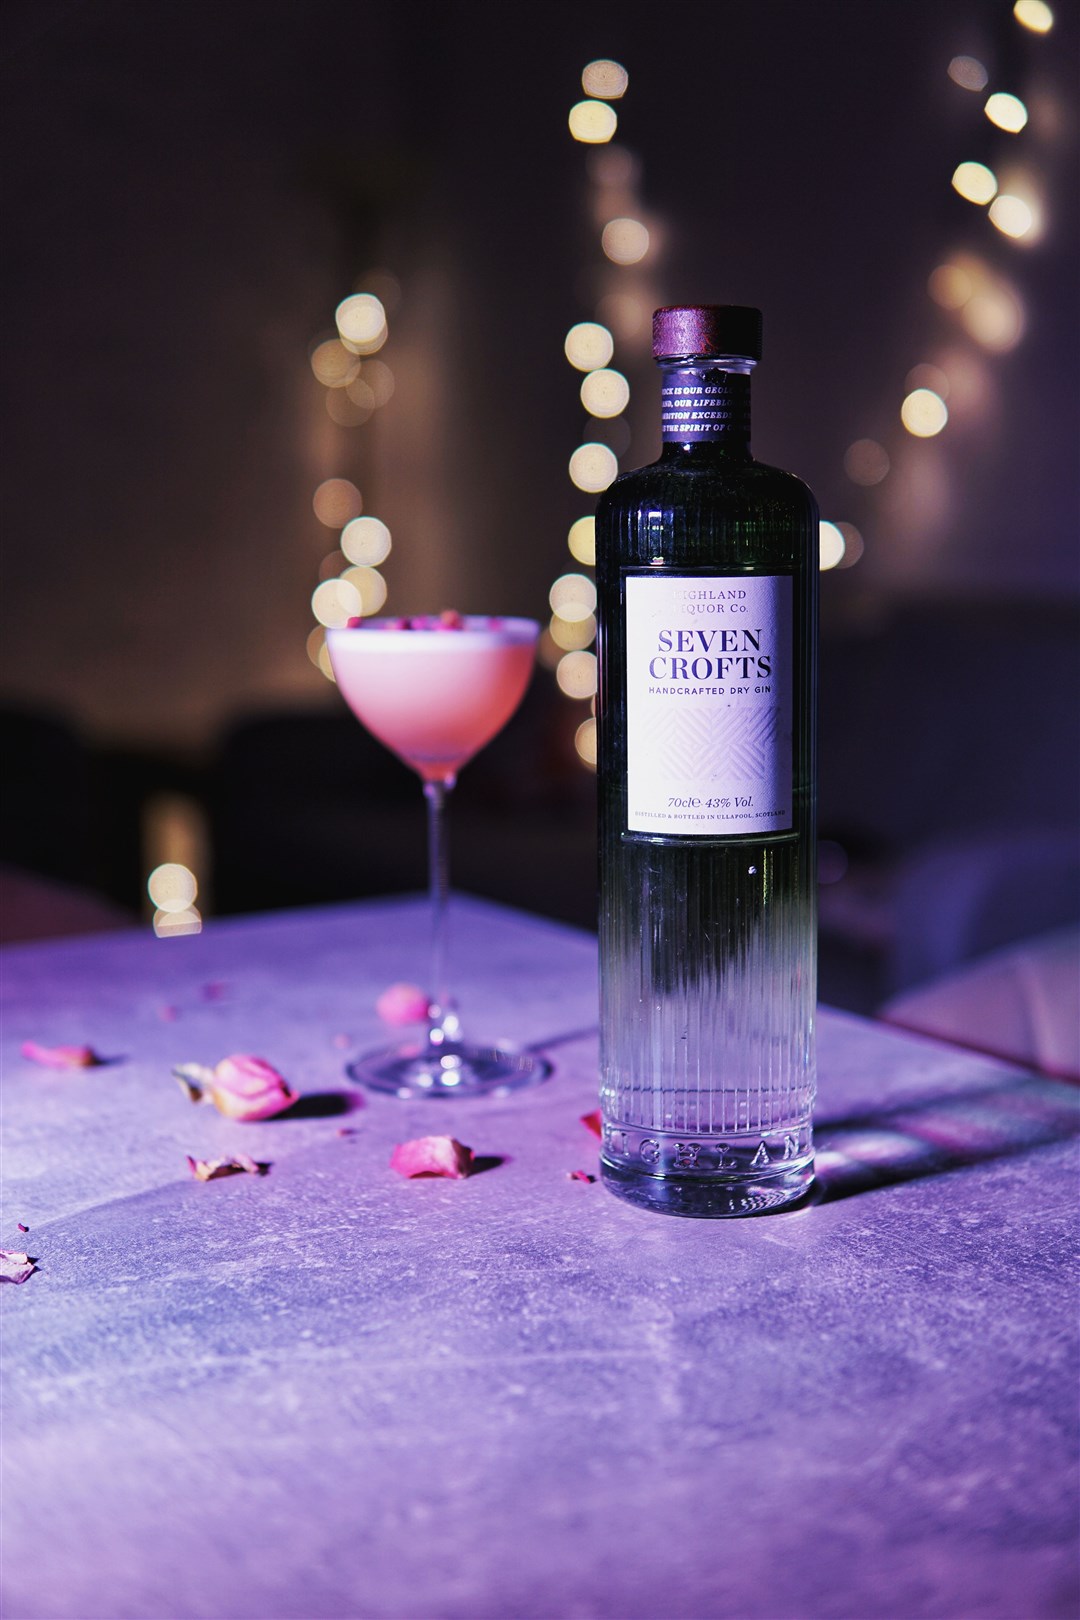 Blood Red Rose is a drink created by Scottish Mixology in collaboration with Seven Crofts gin from Ullapool to wish you a tasty Valentine's day. Picture: Jack Jamieson, Scottish Mixology.